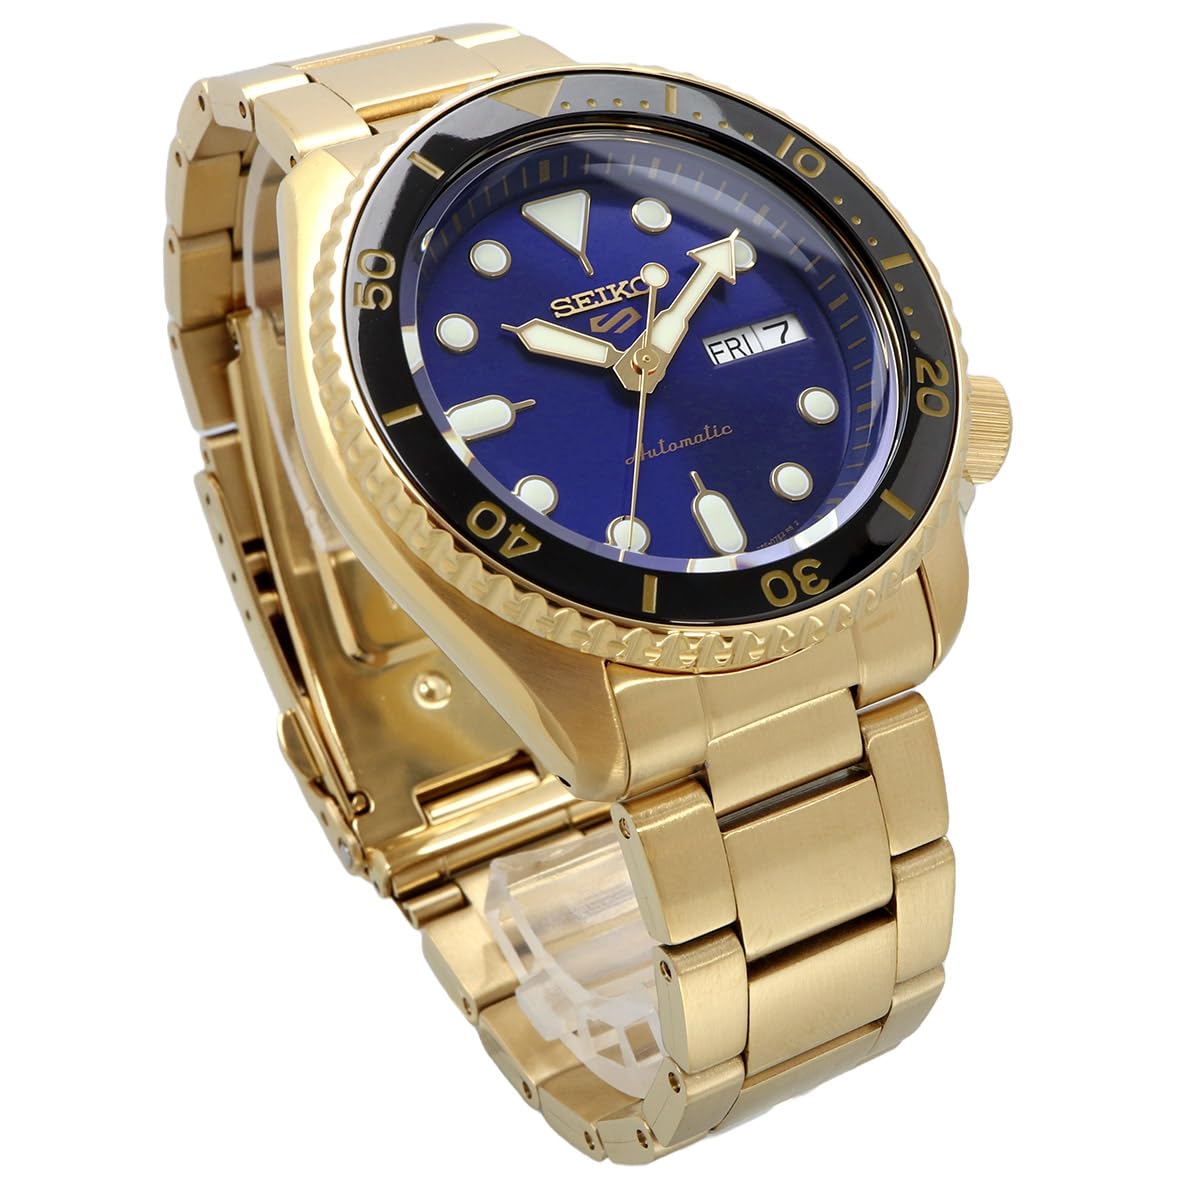 Seiko SRPK20 Men's 5 Sports Skx Sports Style Automatic Watch, Made in Japan, Made in Japan, U.S. Special Creation SRPK20, Cobalt Blue x Gold, Sporty